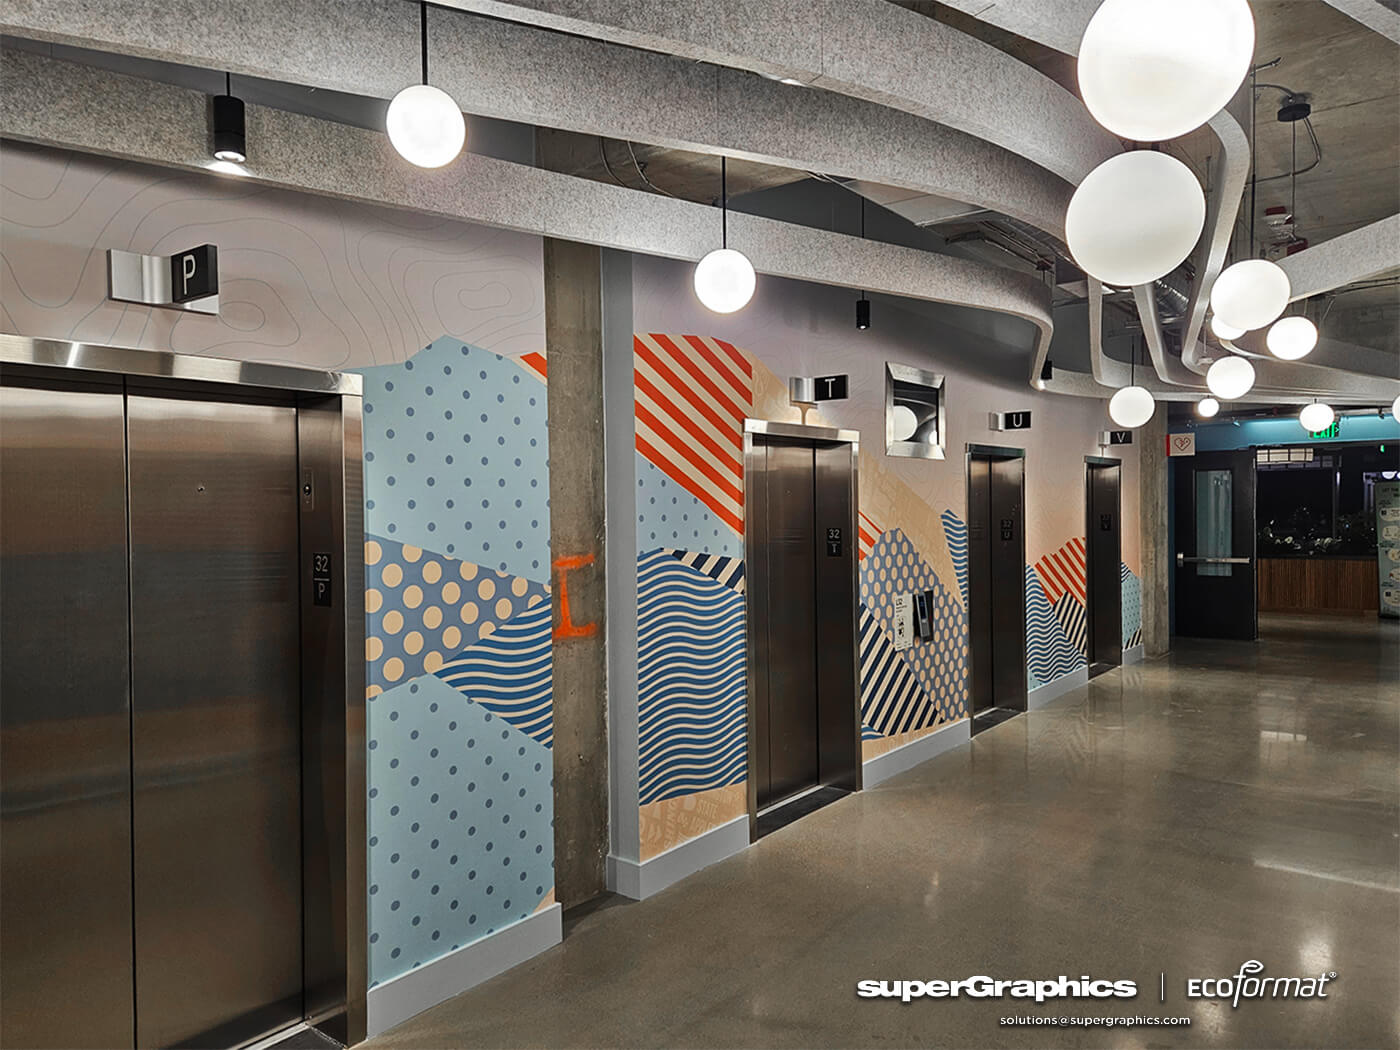 A modern office space with vibrant wall covering depicting abstract graphics, enhancing the experiential environment.